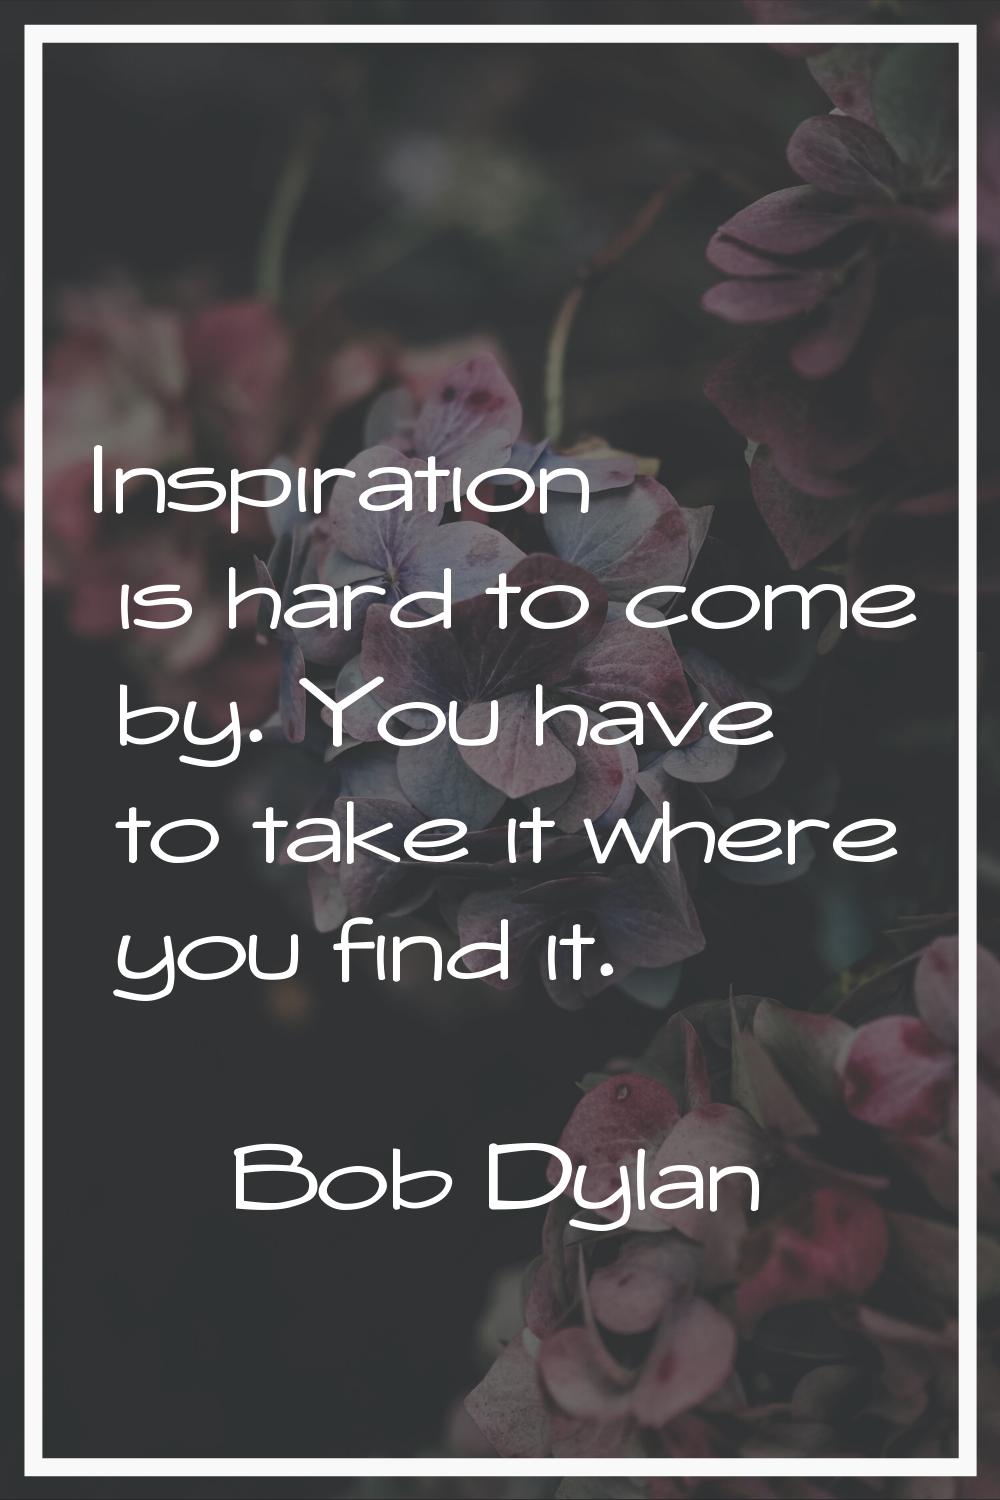 Inspiration is hard to come by. You have to take it where you find it.